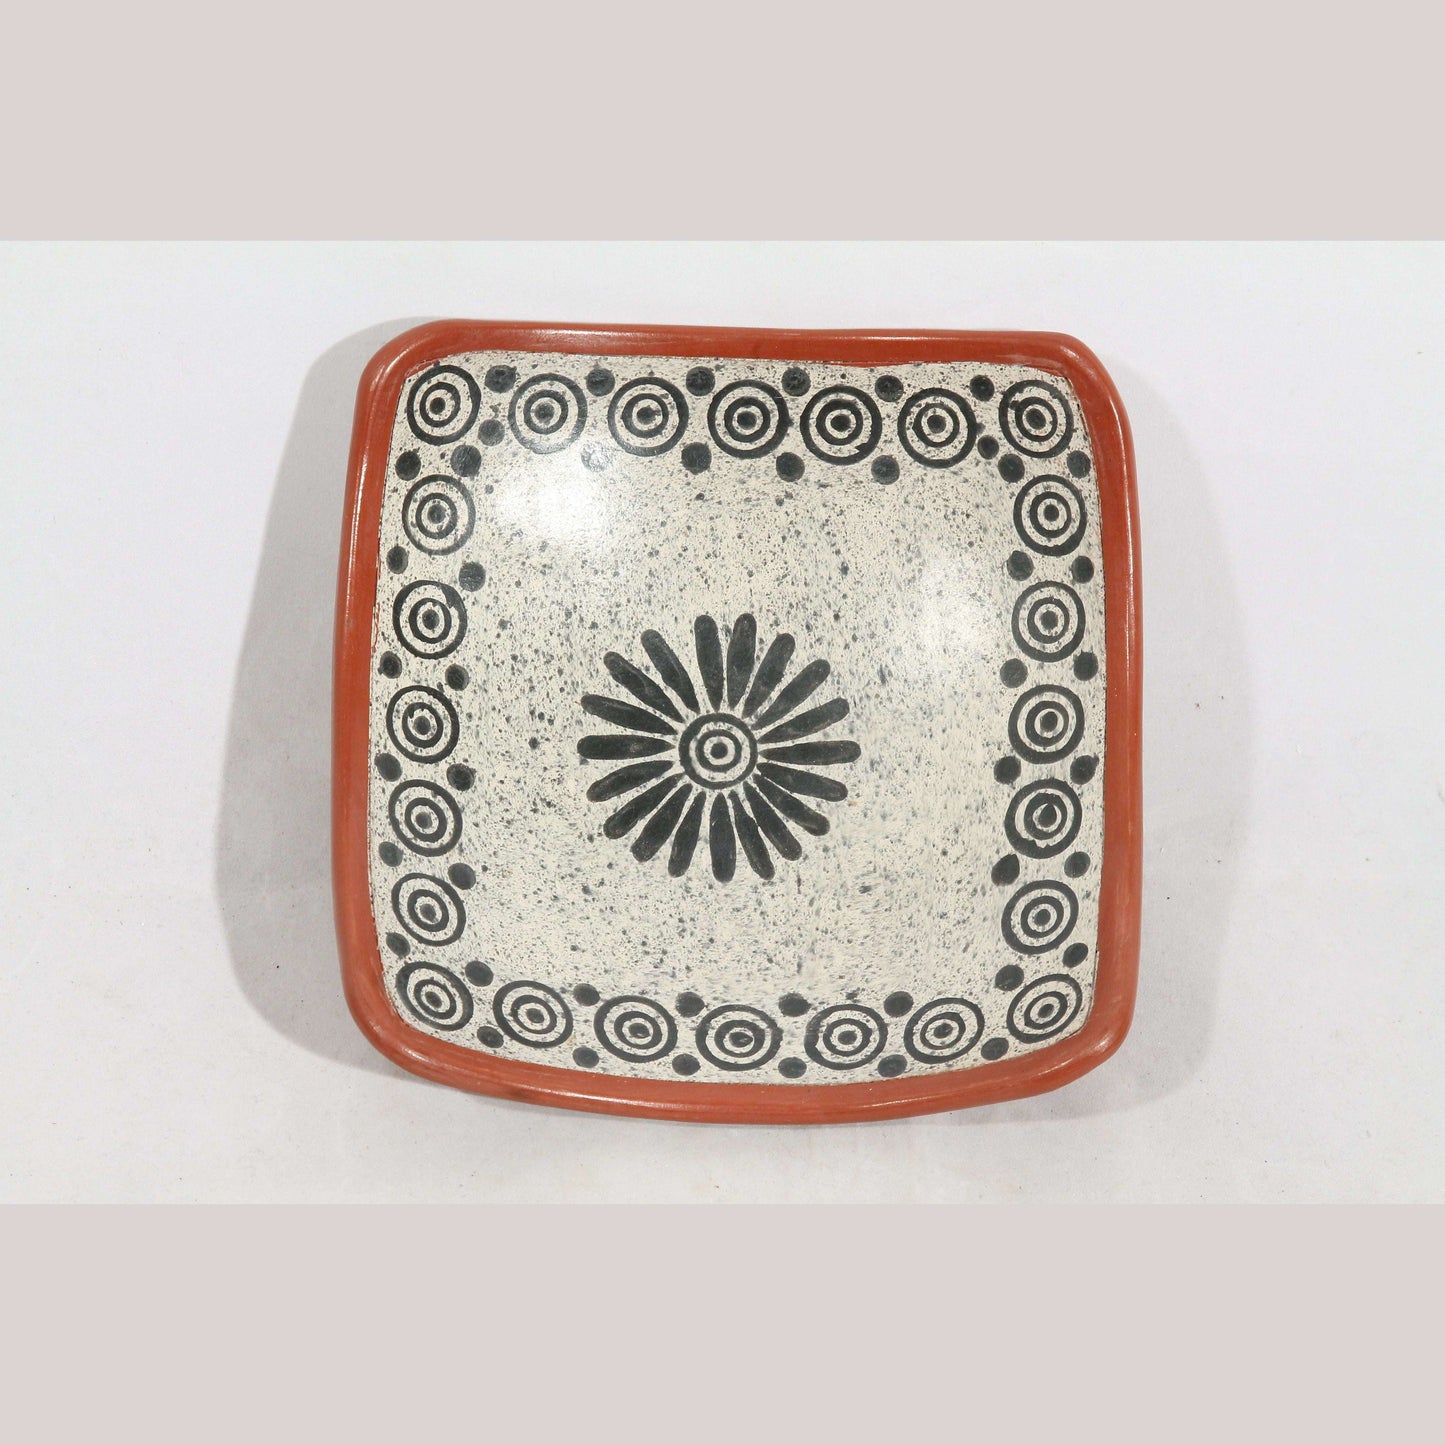 New Ceramic/Pottery Candy/Jewelry Grey Dish Mexican Folk Art Roberto Fiscal